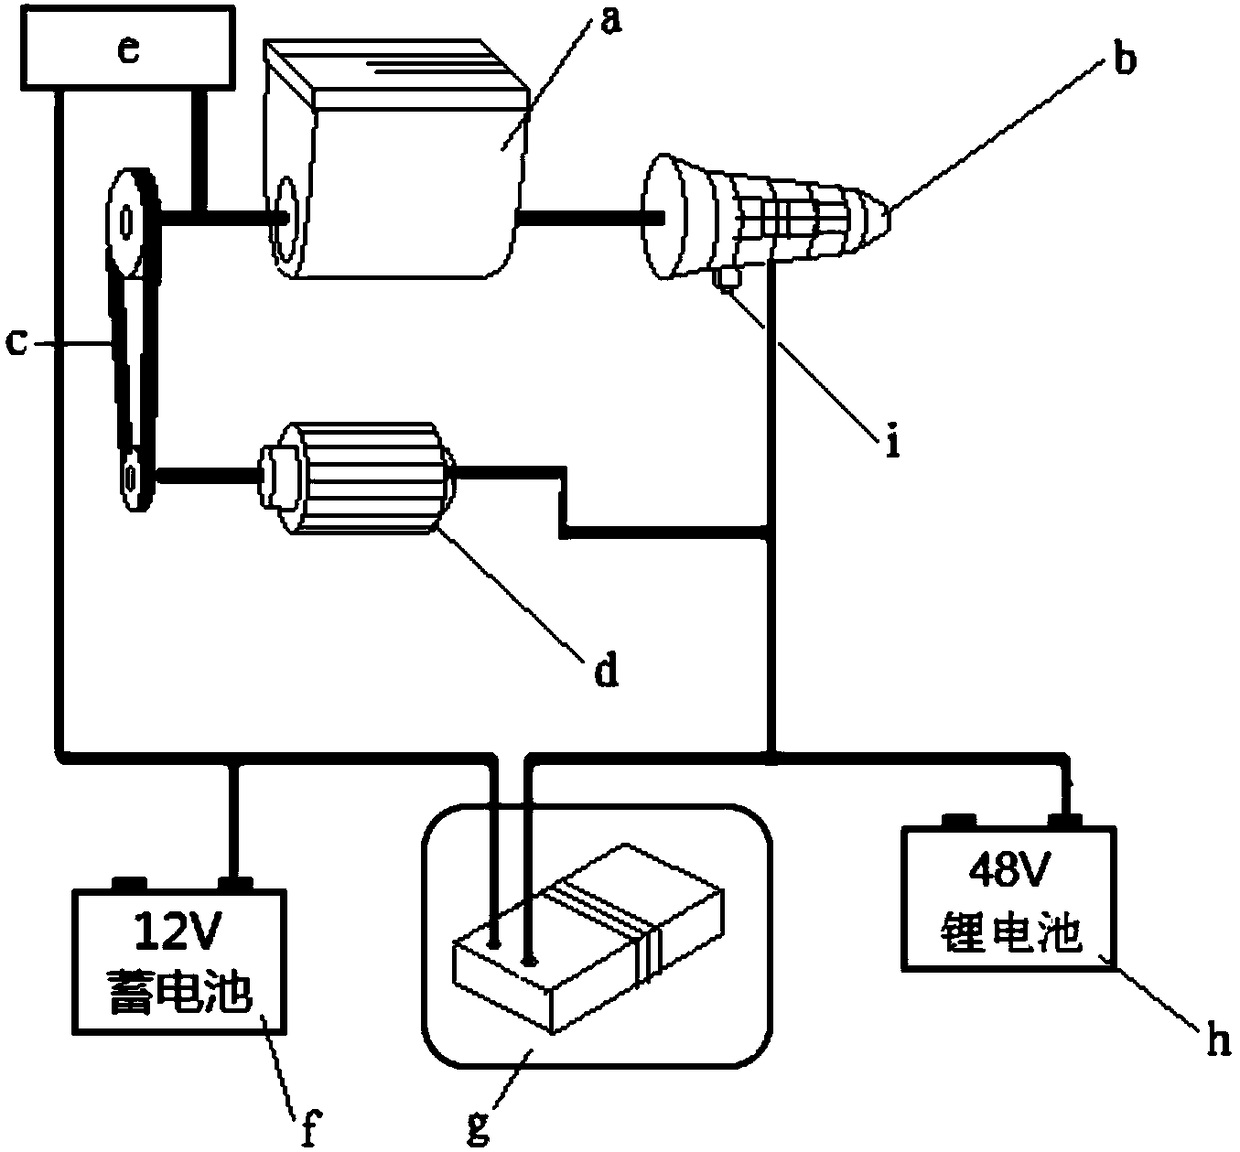 Vehicle control method and device based on BSG motor